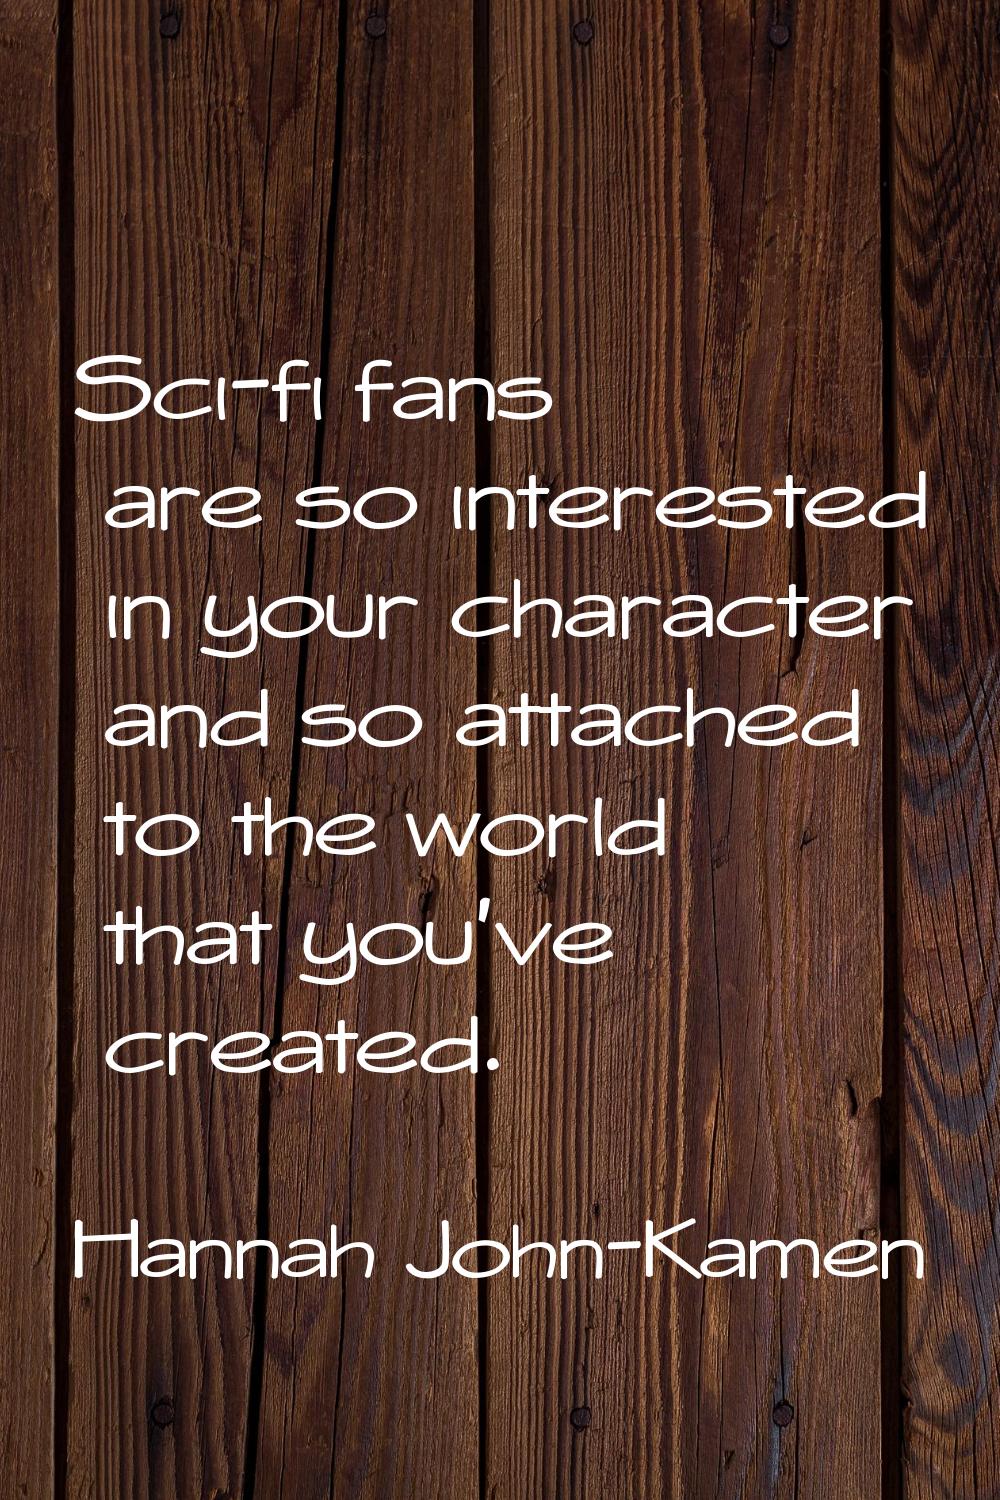 Sci-fi fans are so interested in your character and so attached to the world that you've created.